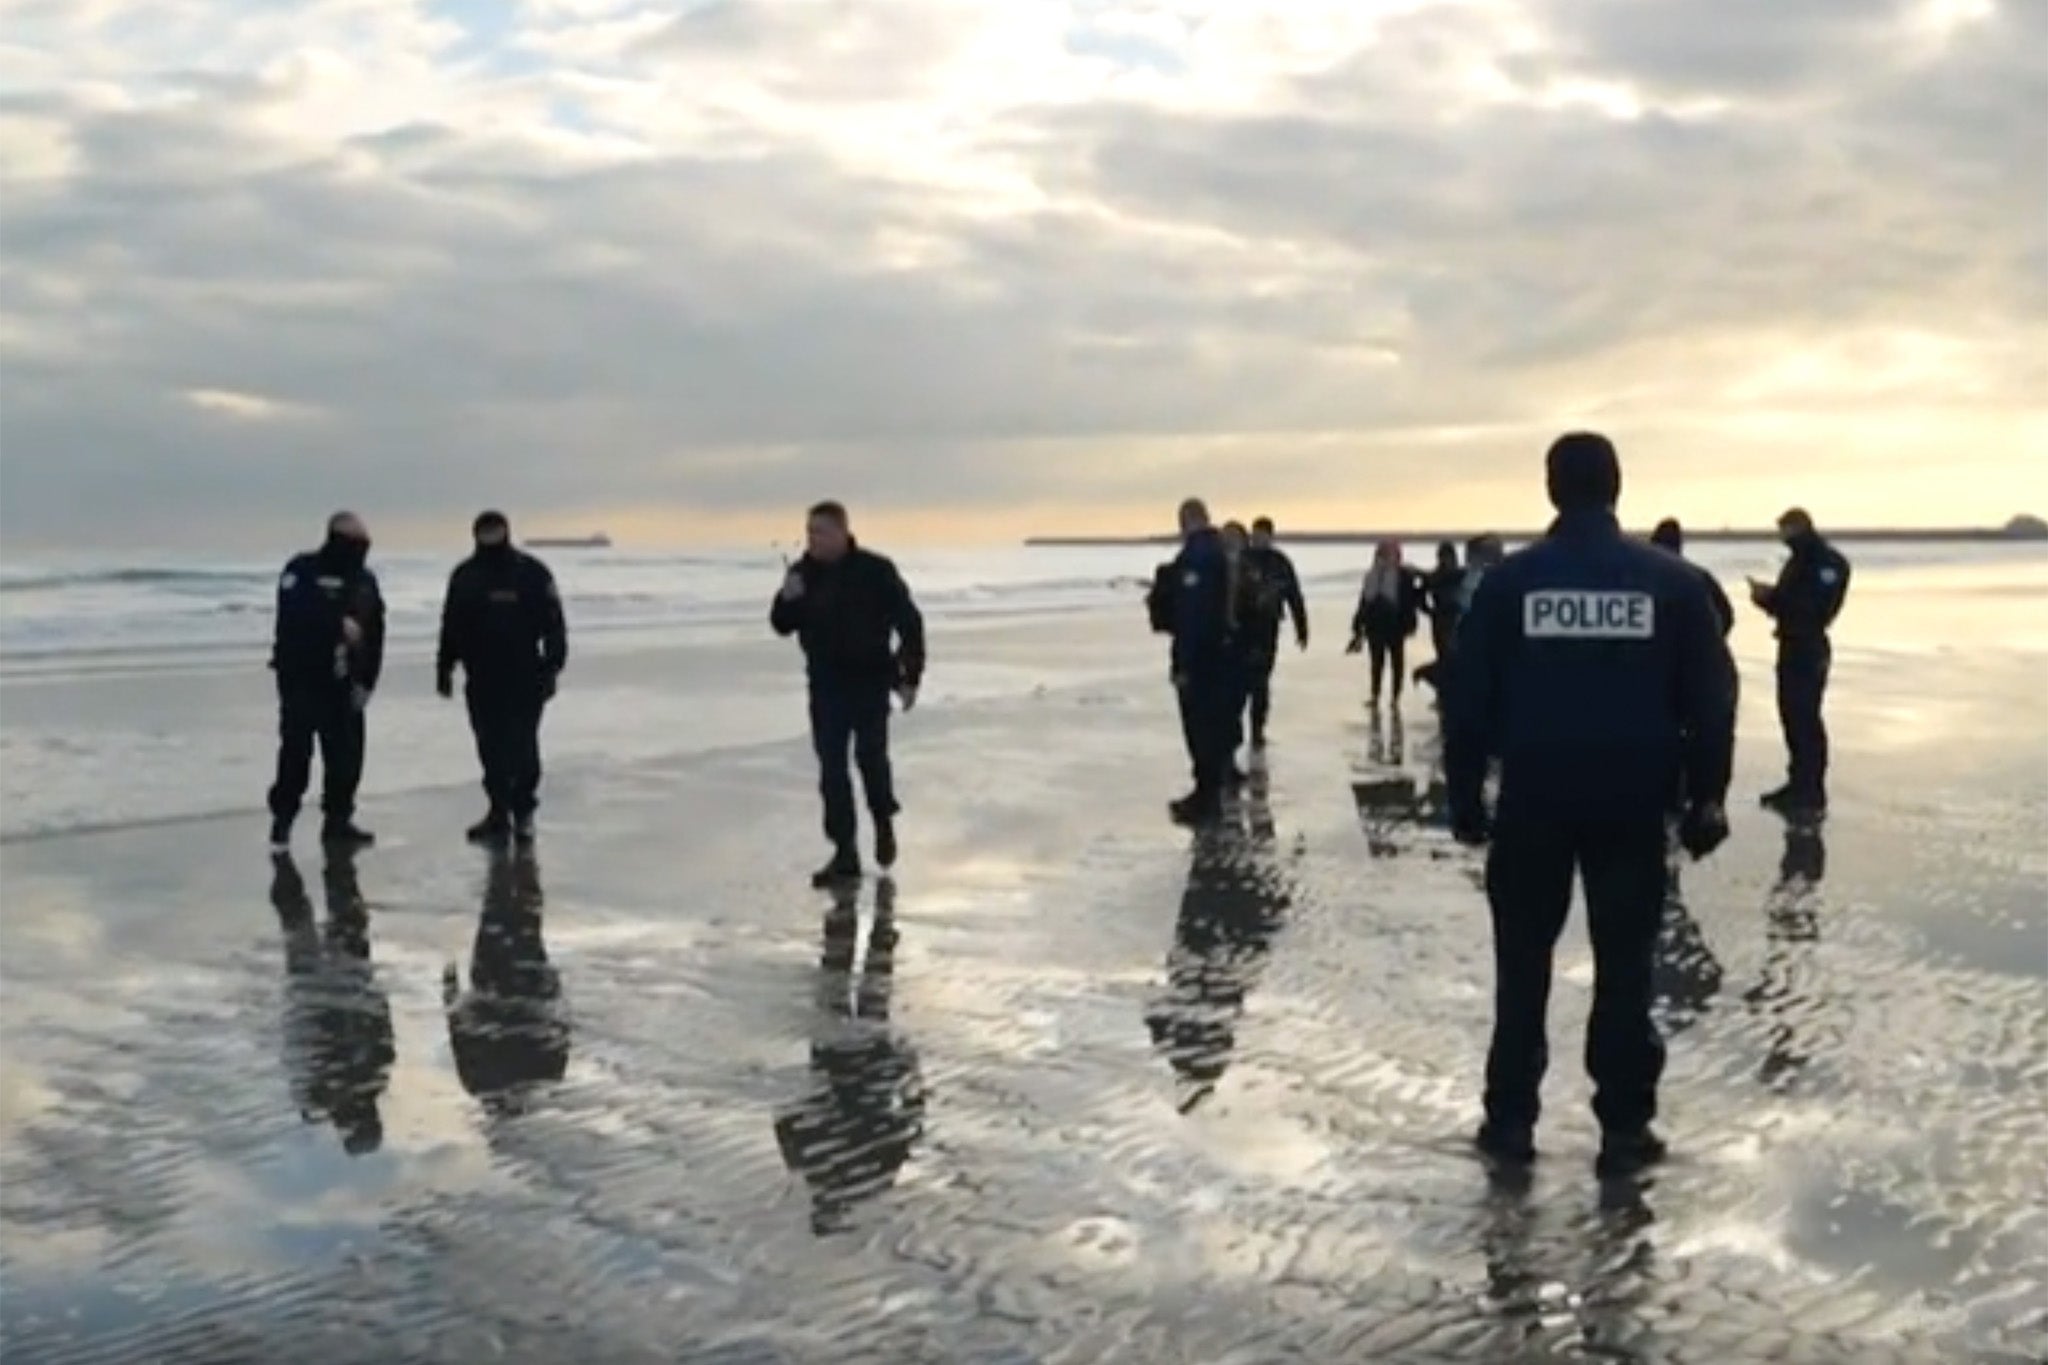 Footage from BBC News shows police on the beach at Dunkirk last Tuesday morning